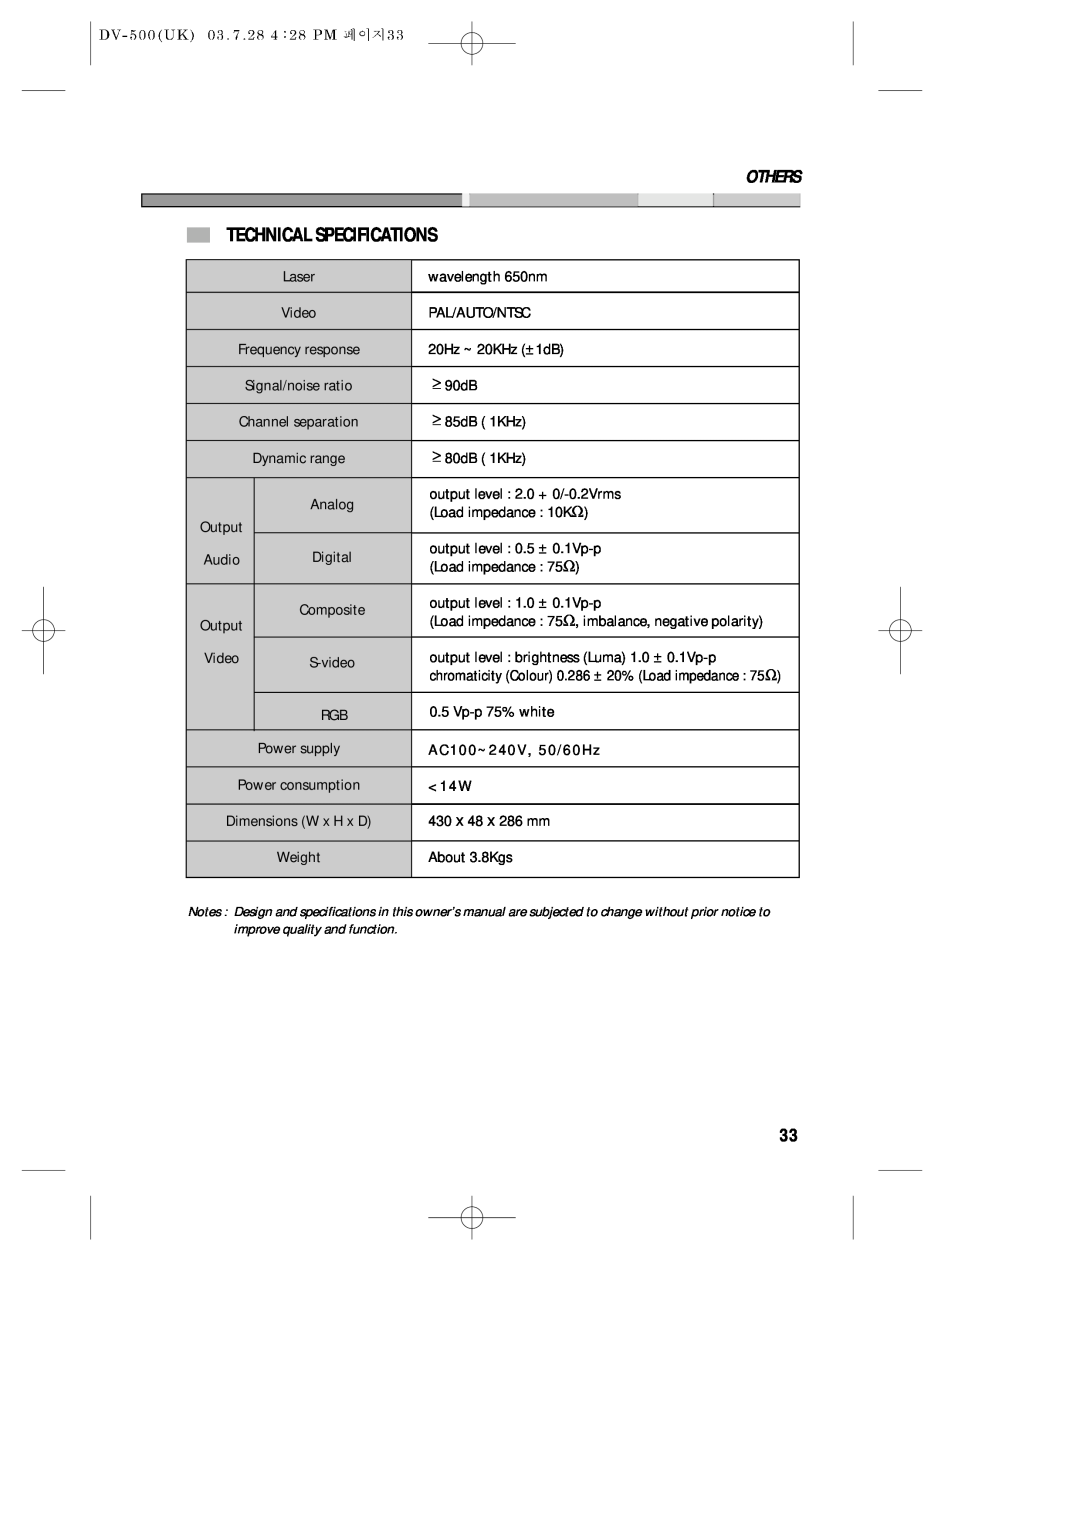 Daewoo DV-500 owner manual Technical Specifications, Others 